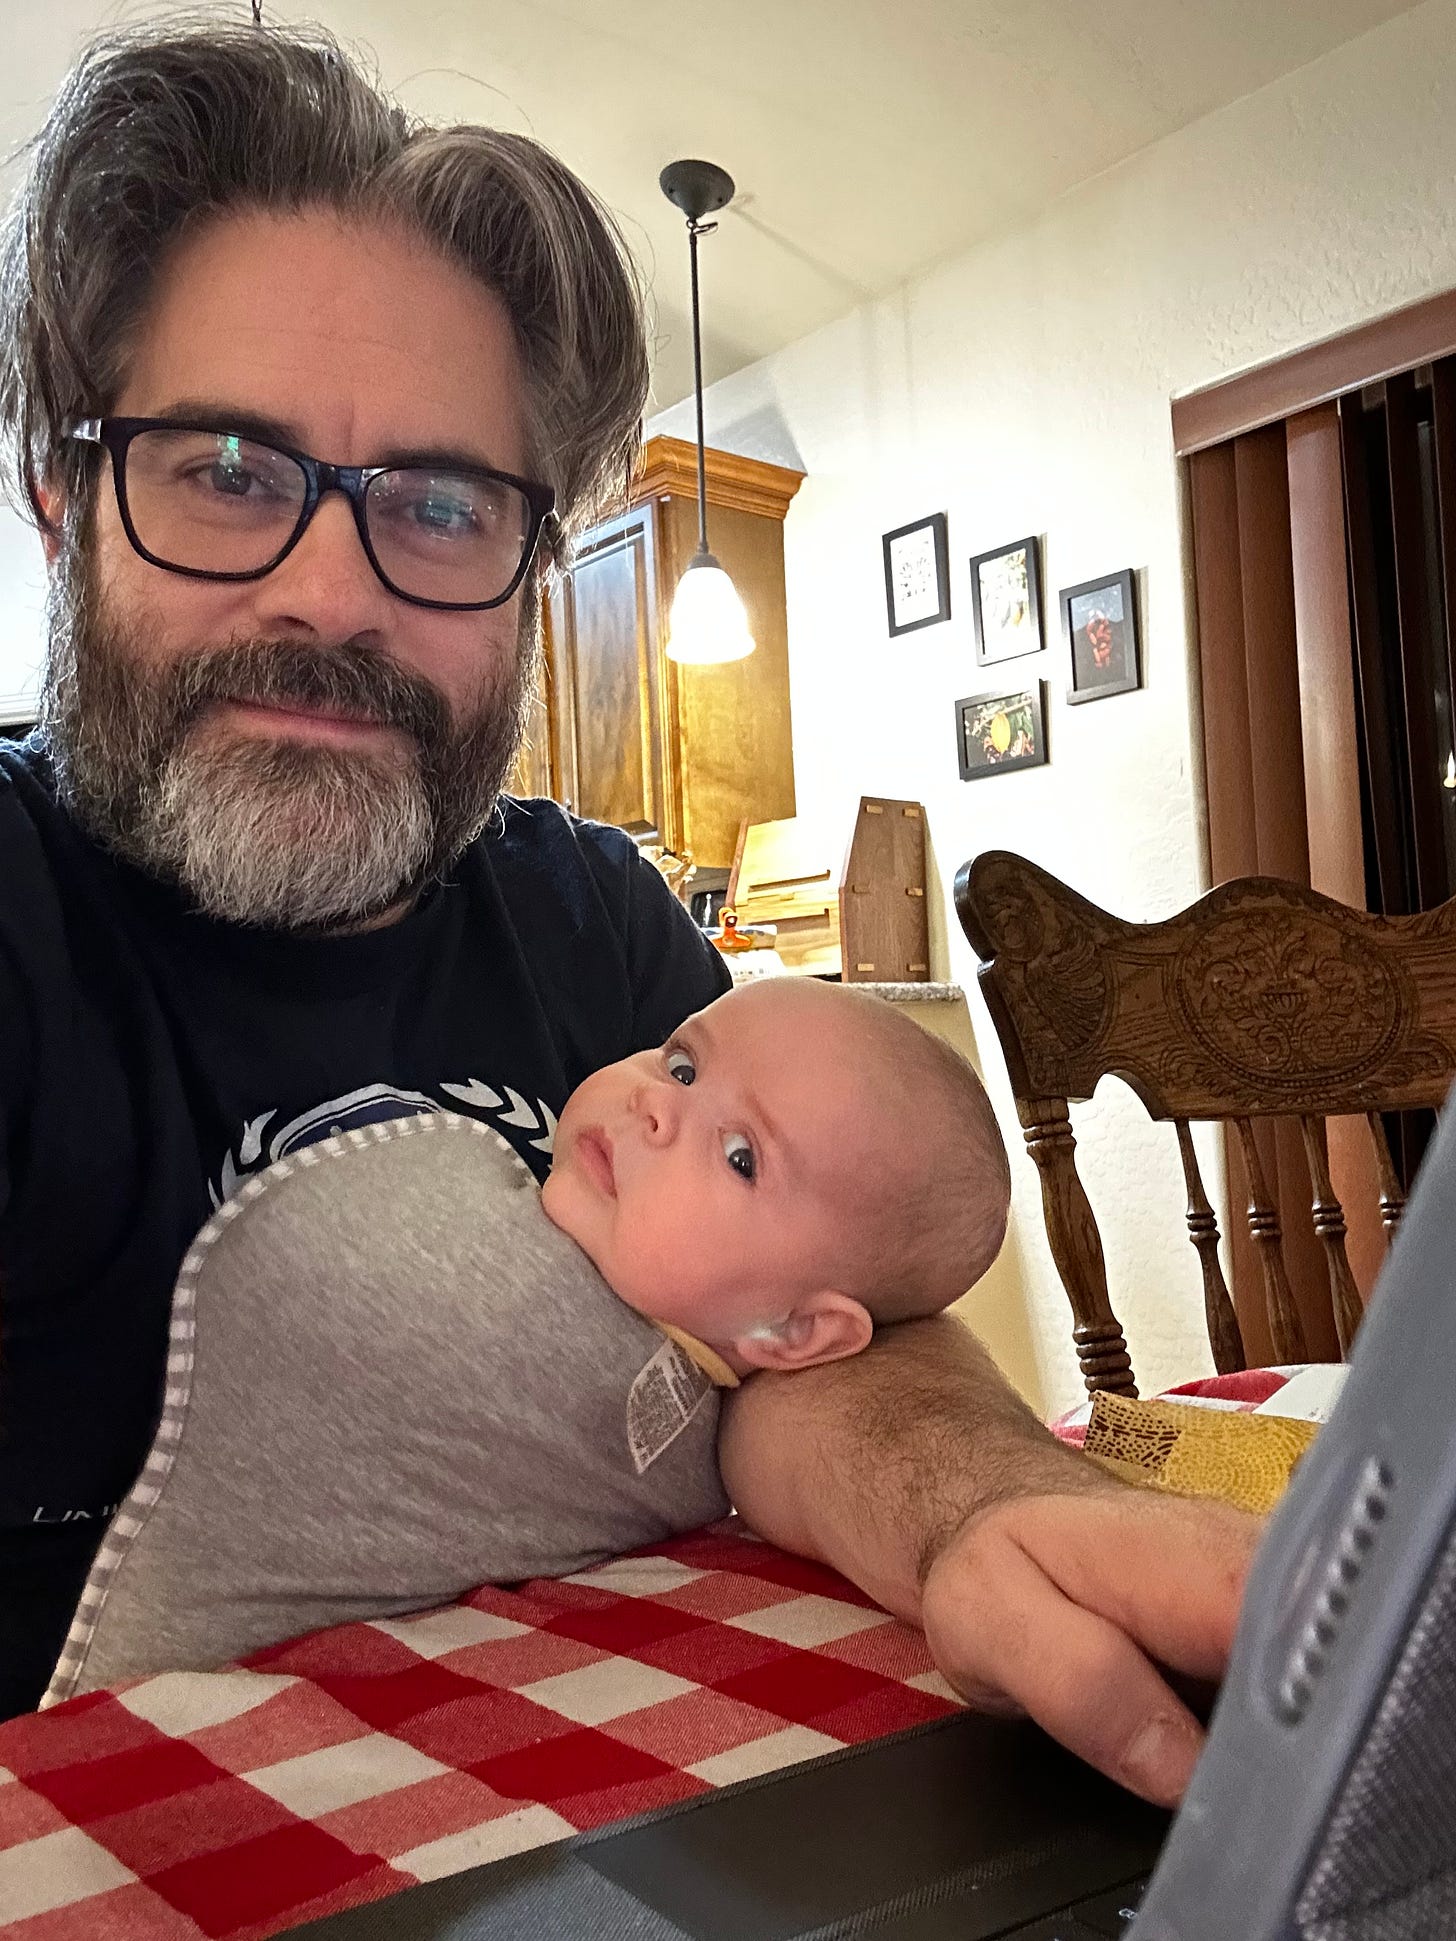 A photograph of me using my tablet while holding a baby, who is looking at the camera.